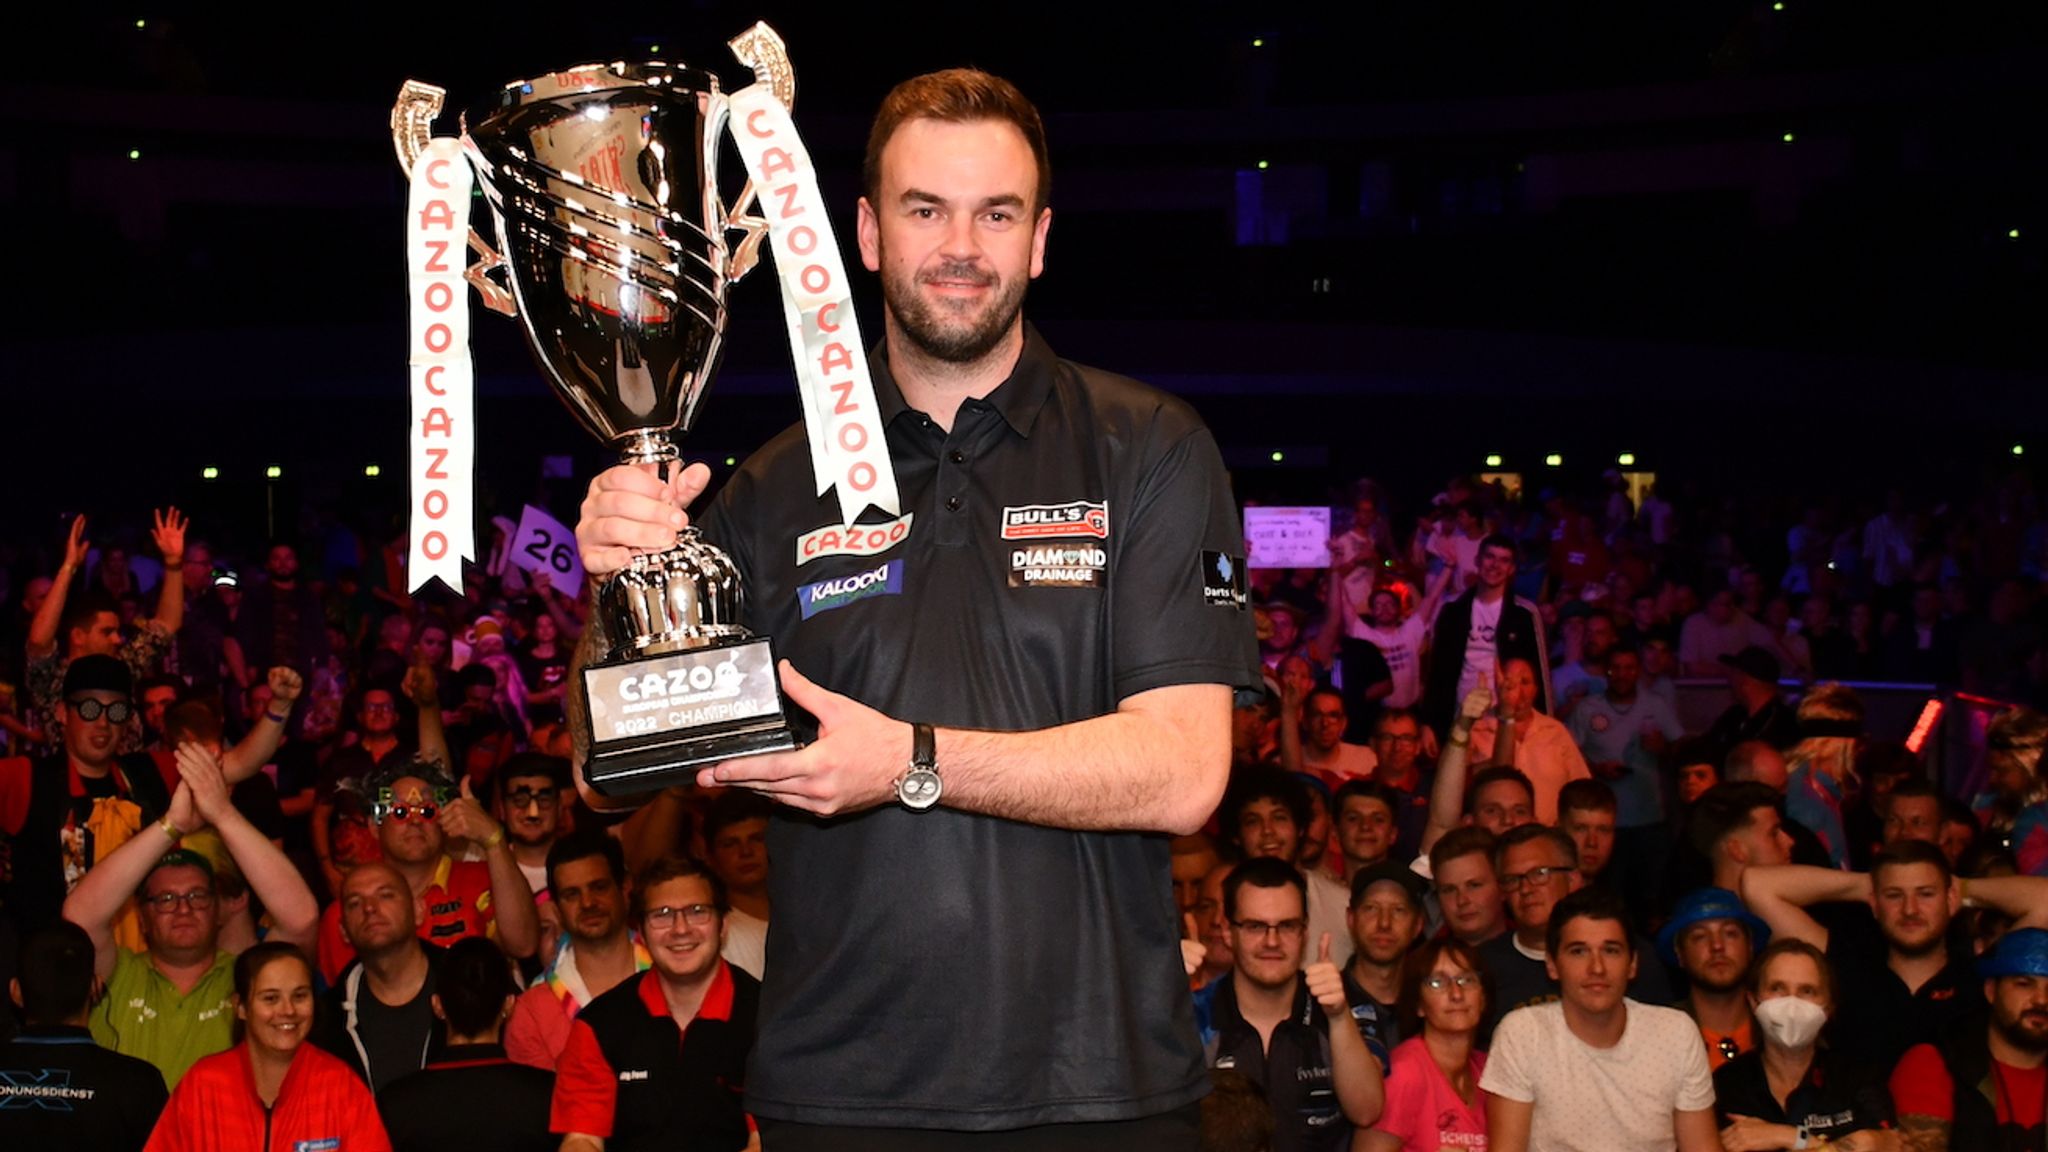 European Championship Smith defeats Michael Smith to win first TV title | Darts News | Sports